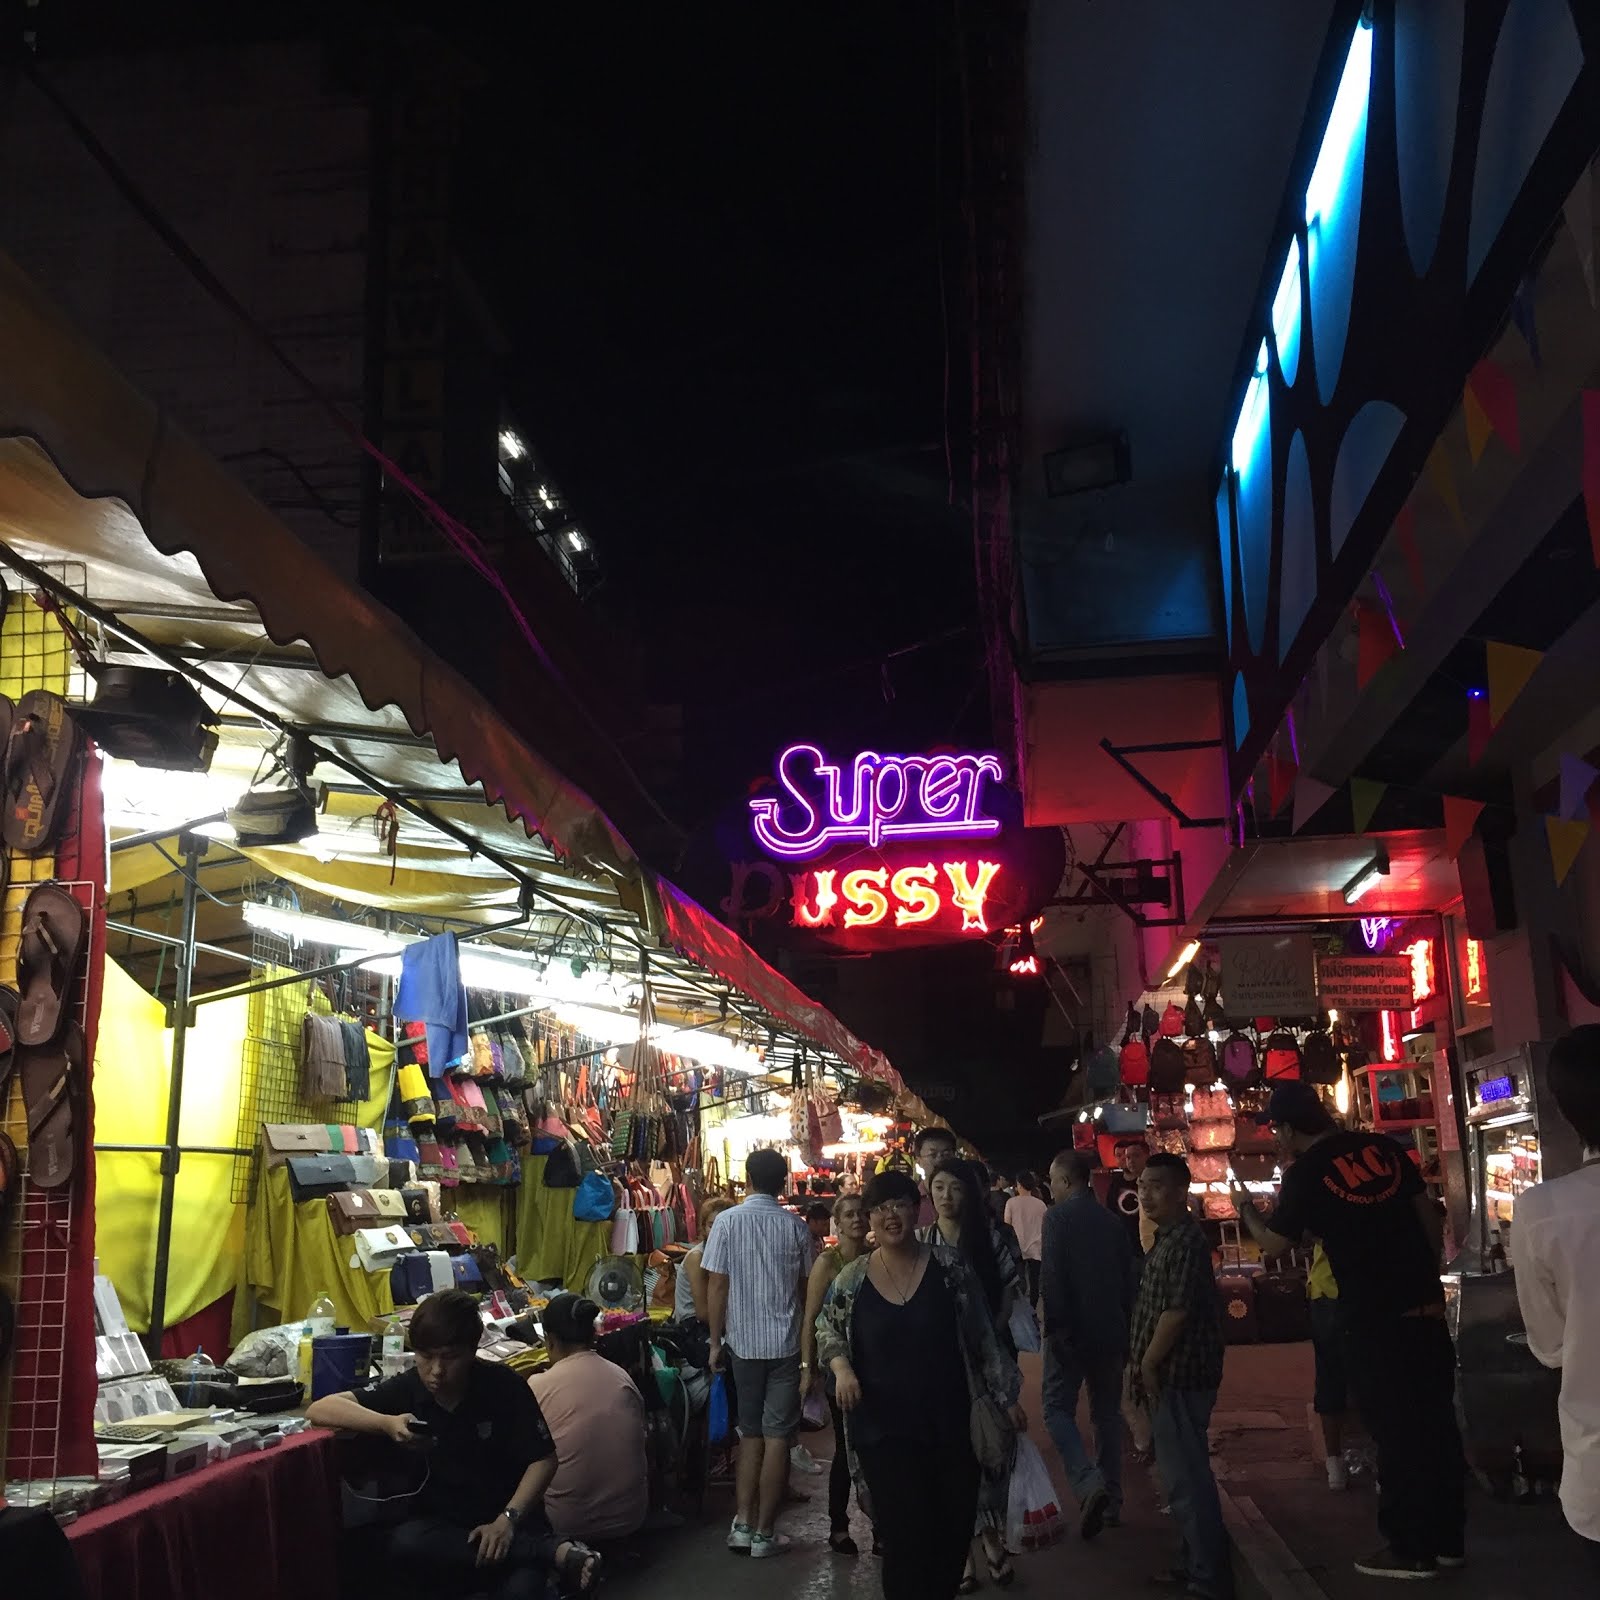 Patpong Road - the Infamous rad in Bangkok, Thailand // 3 Days in Bangkok - A City Guide